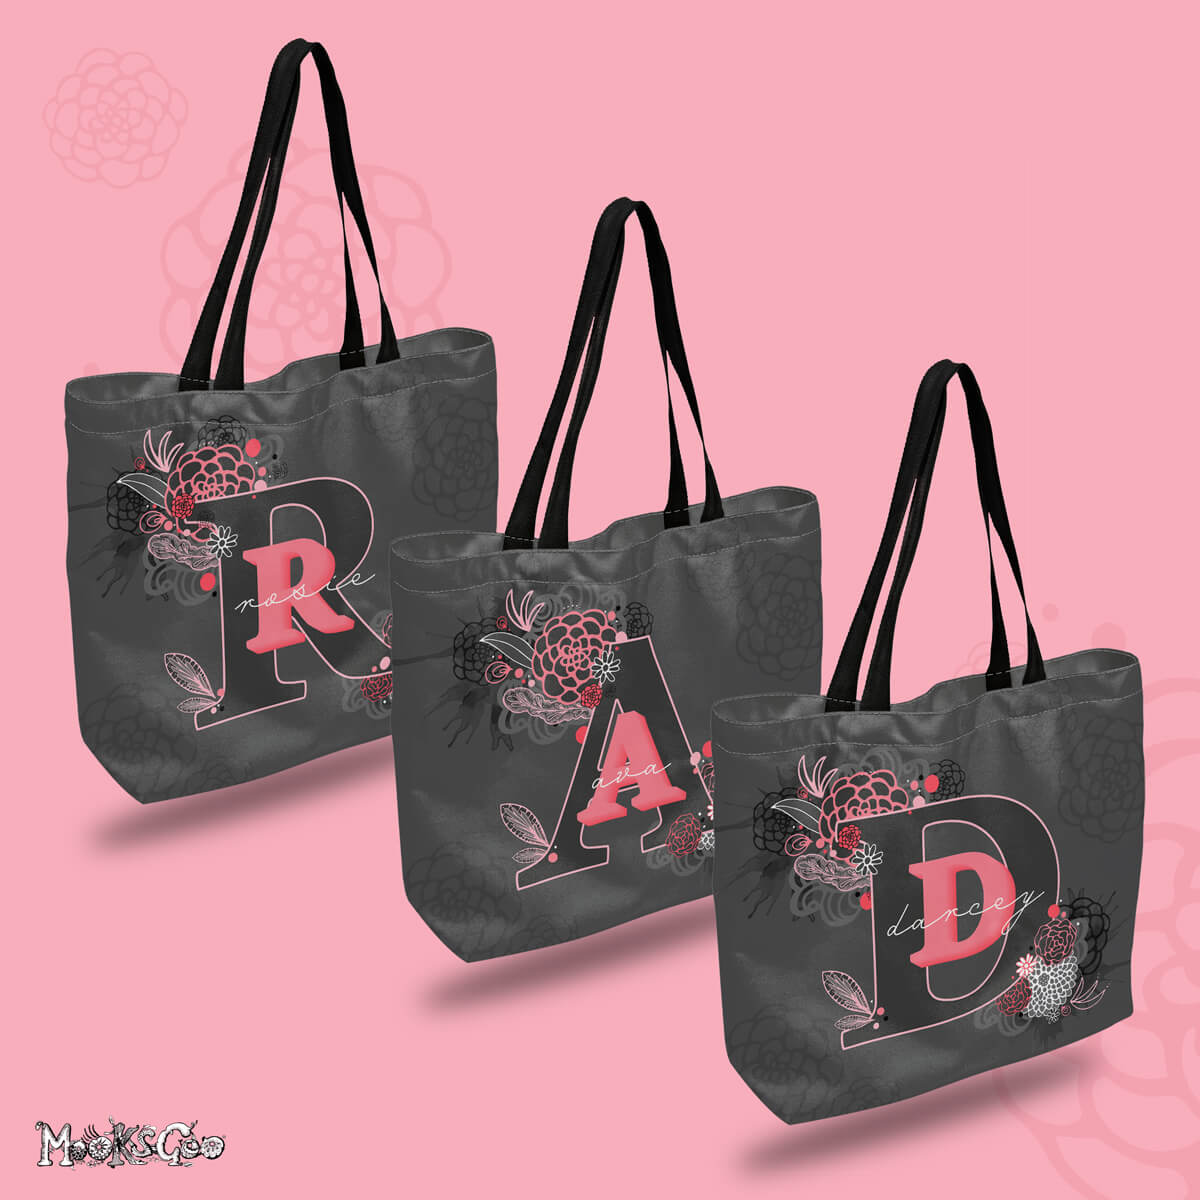 Personalised canvas tote bag, with a dark grey background, an initial in a bold font in a darker grey colour with pink outline, and a name in white with script writing. Illustrations are of flowers, feathers and watercolour splashes designed by MooksGoo